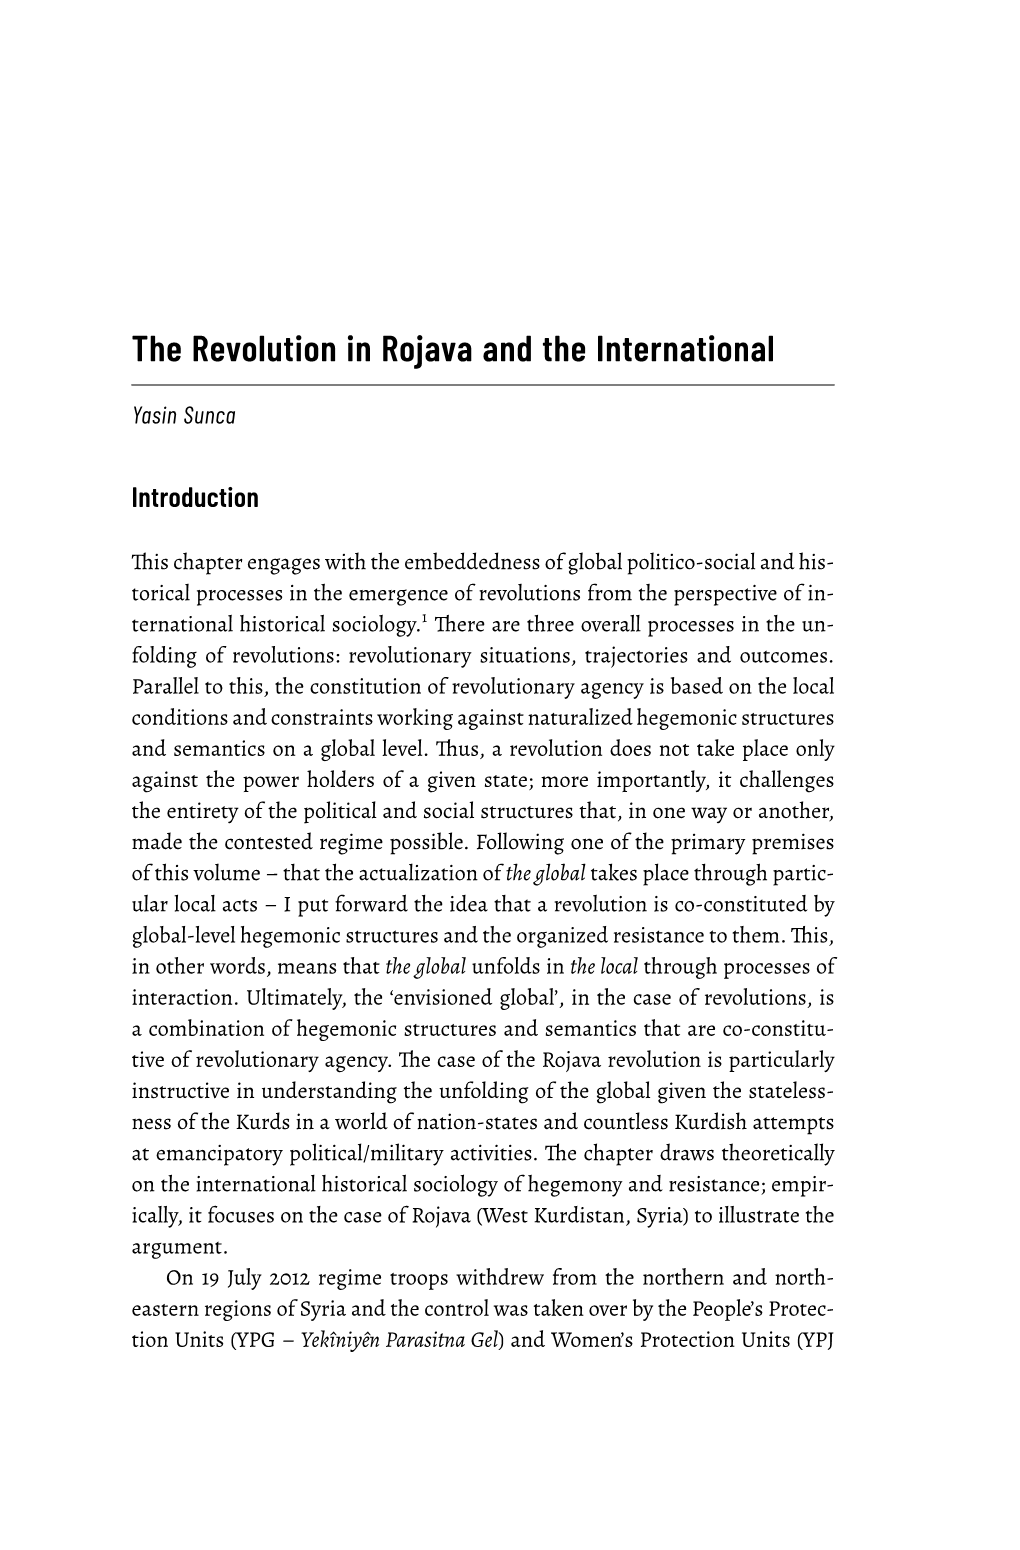 The Revolution in Rojava and the International